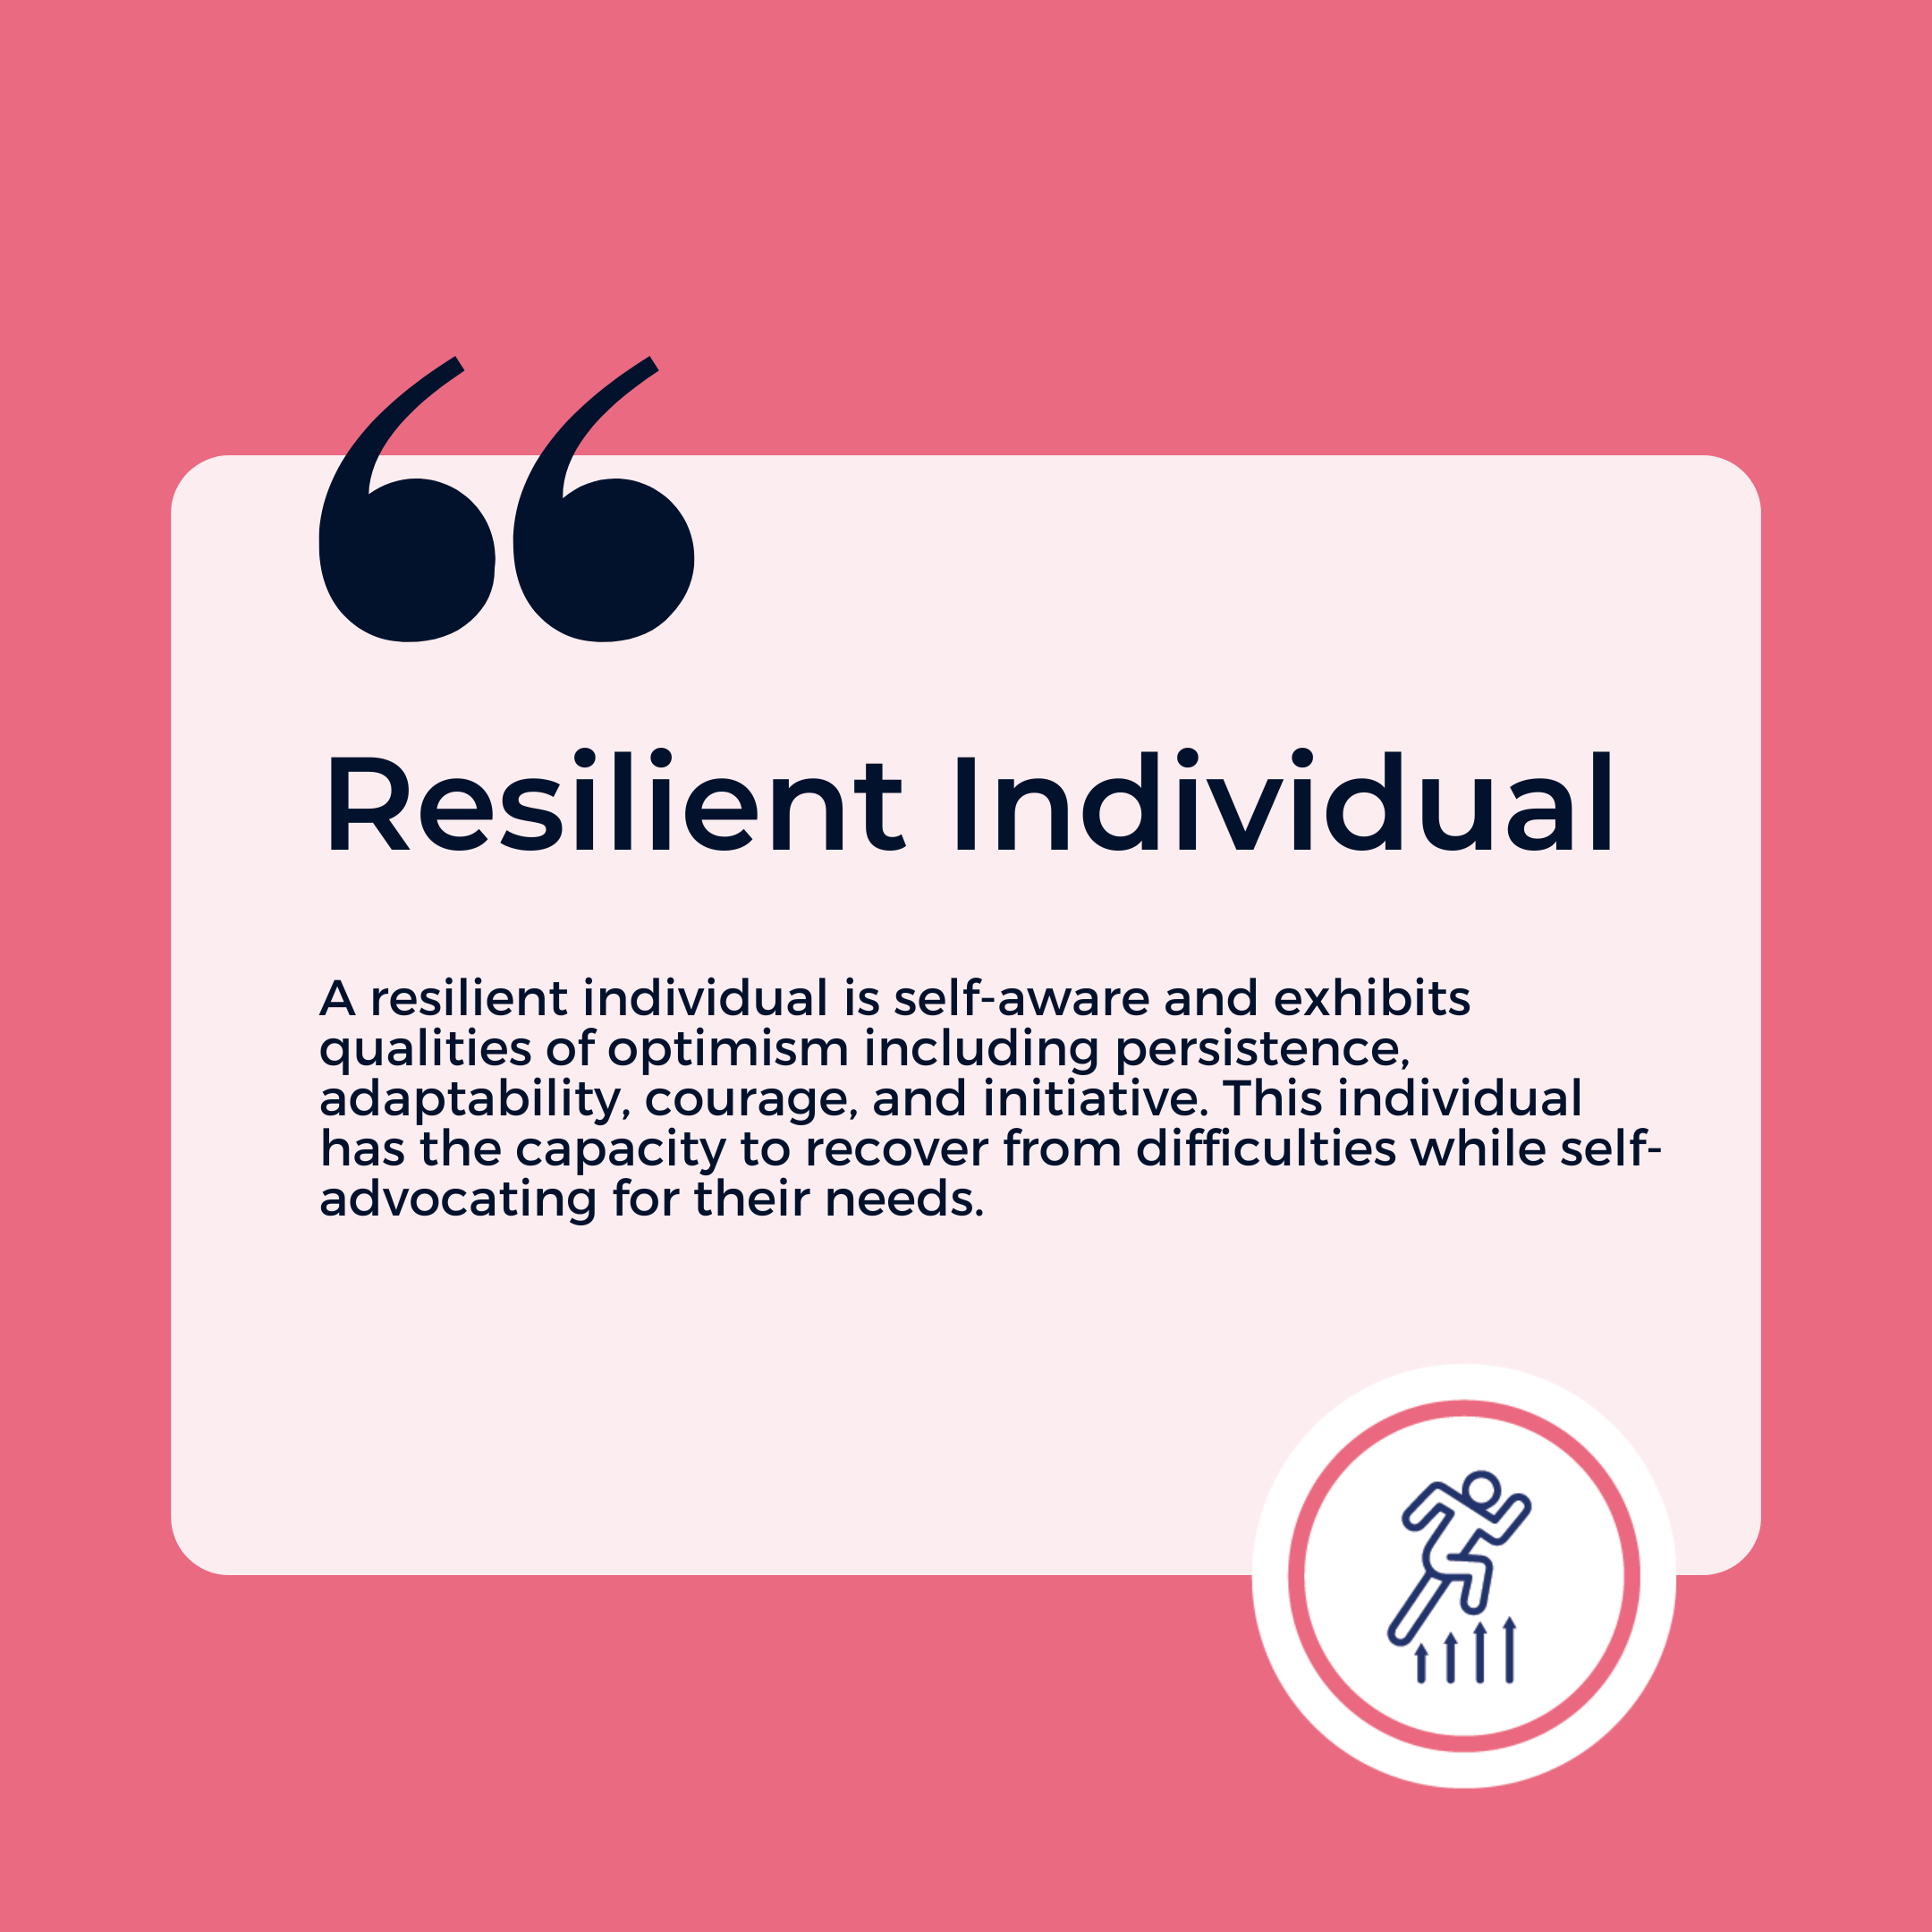 Resilient Individual